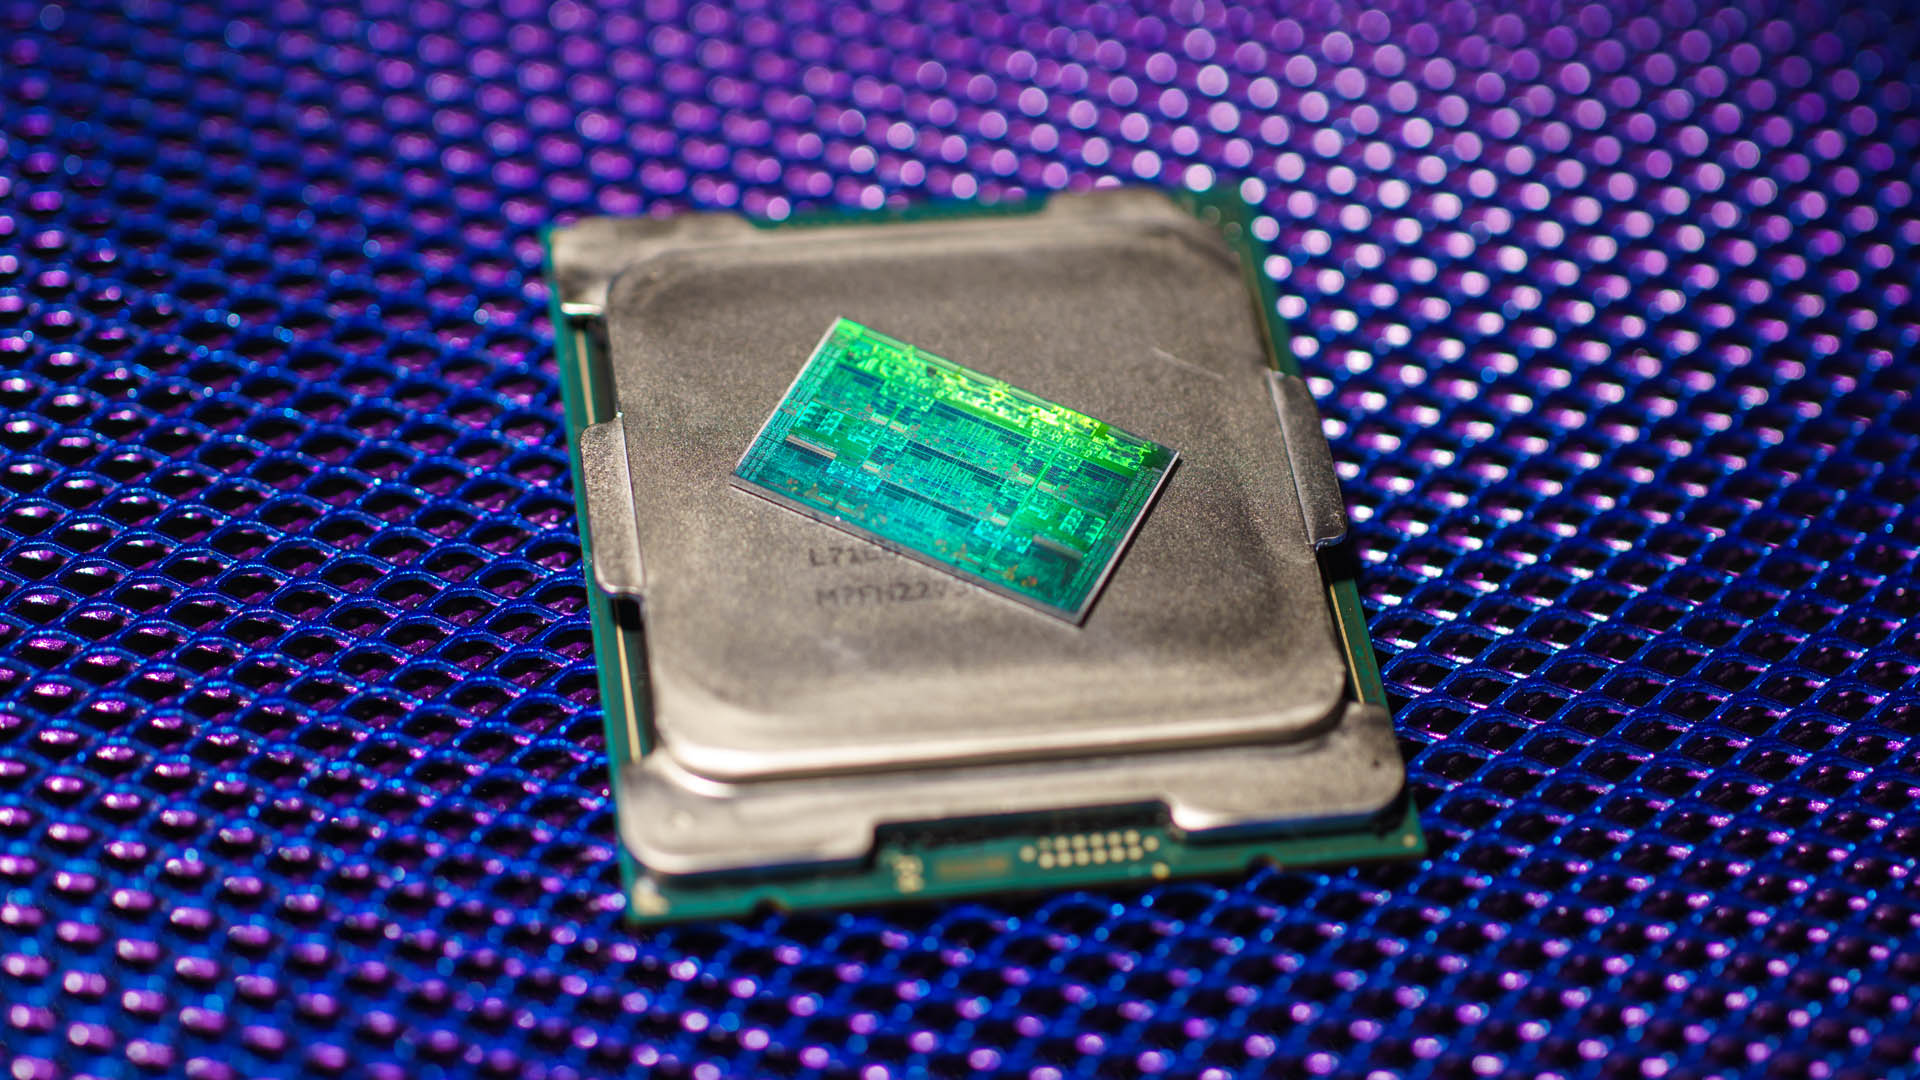 Intel hints at October reveal date for its 10nm Alder Lake gaming CPUs